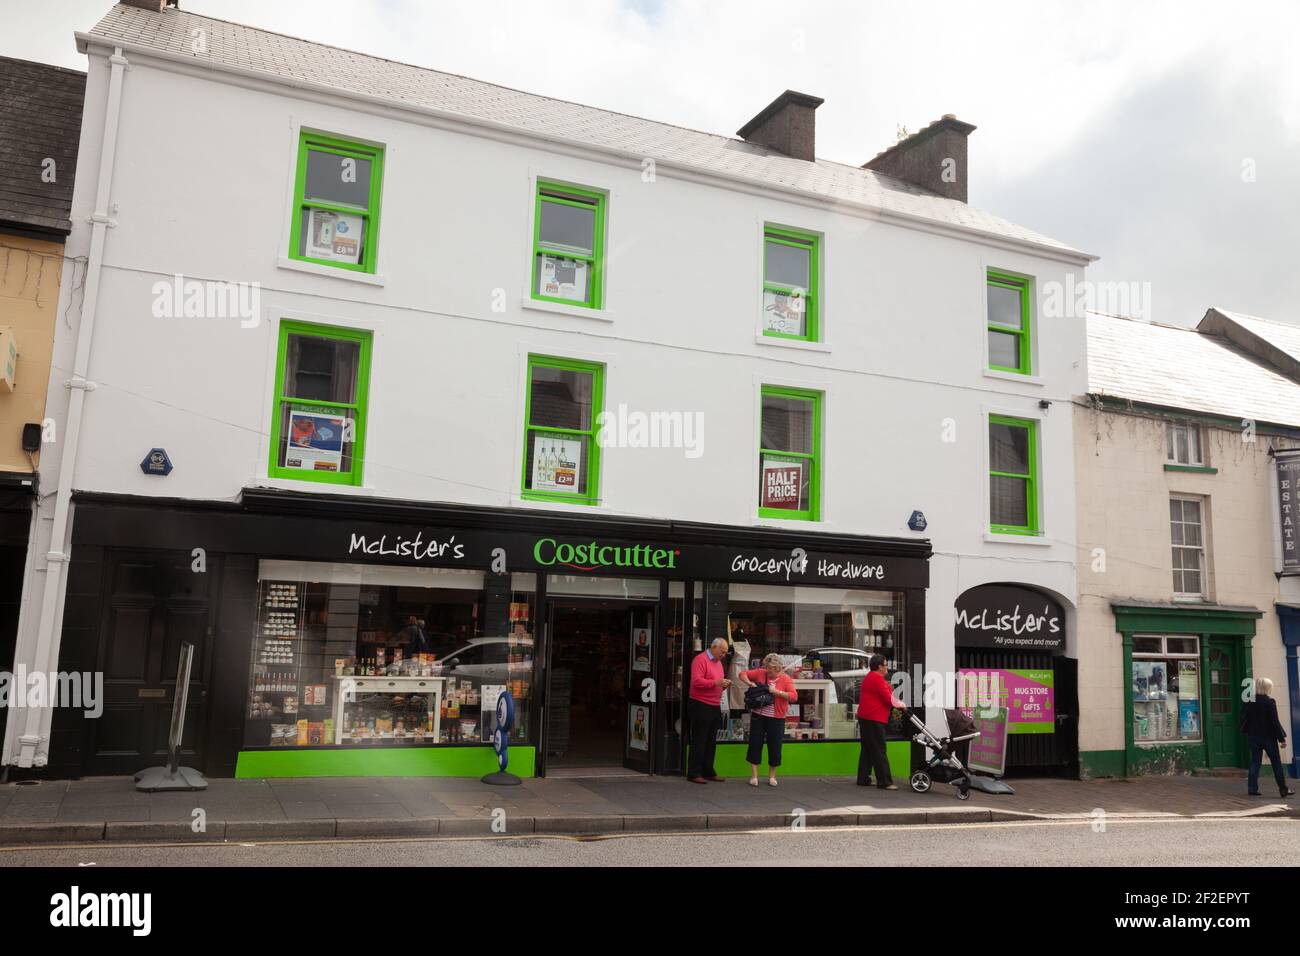 McLister's Costcutter Grocery & Hardware, Ballycastle, Moyle, County Antrim, Northern Ireland, UK Stock Photo